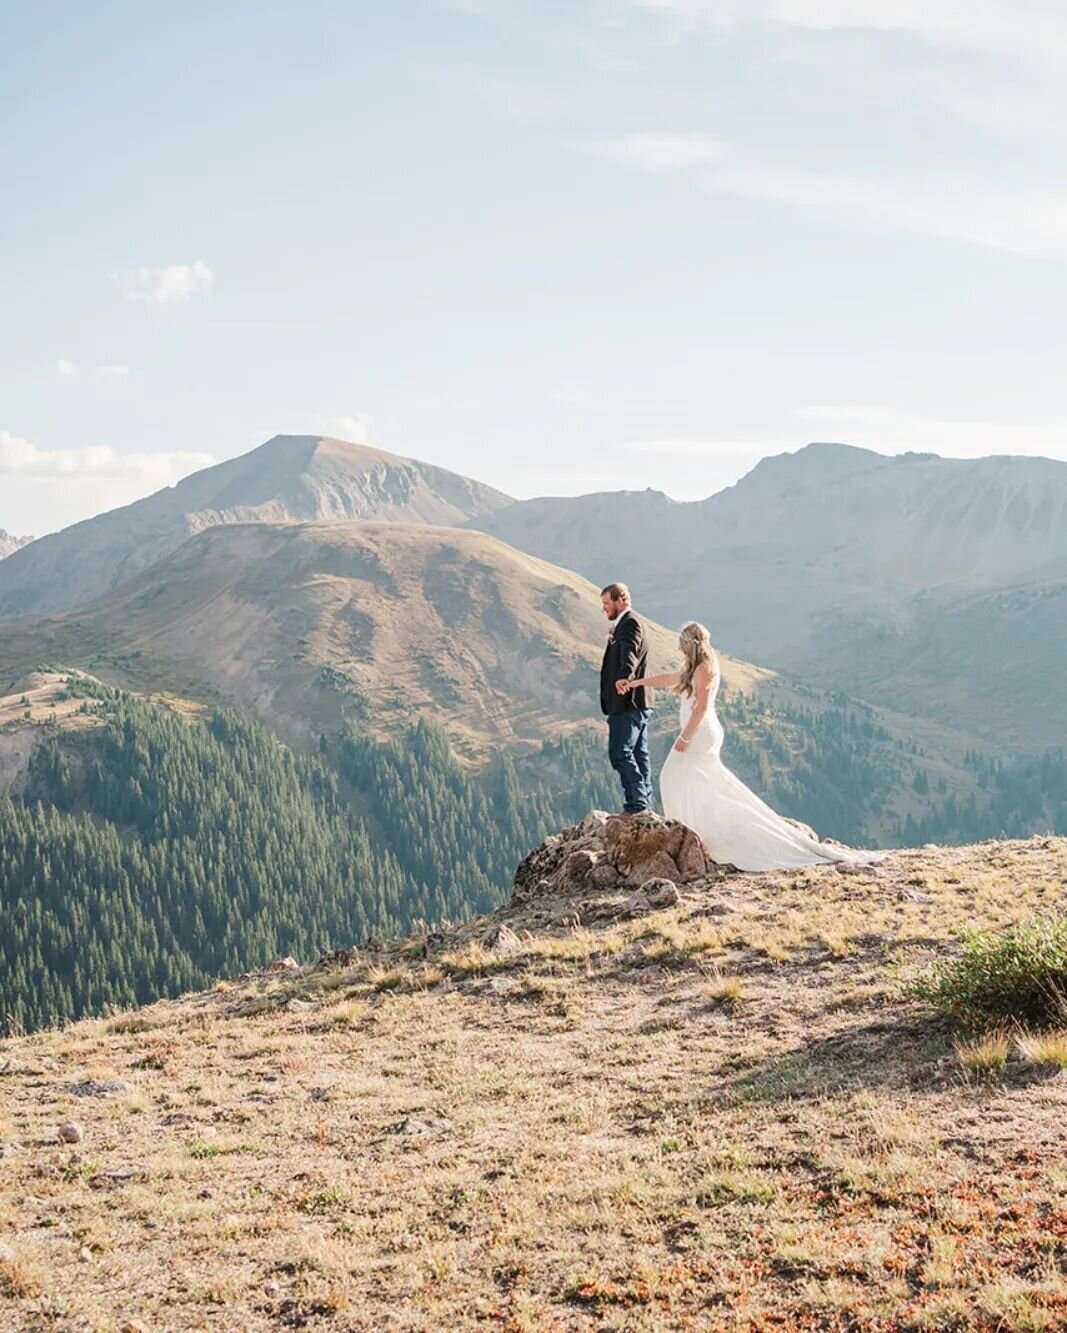 Celebrate Your Love Story with Sam Immer Photography's Natural Light Elopement Photography, Capturing Your Authentic and Candid Moments.